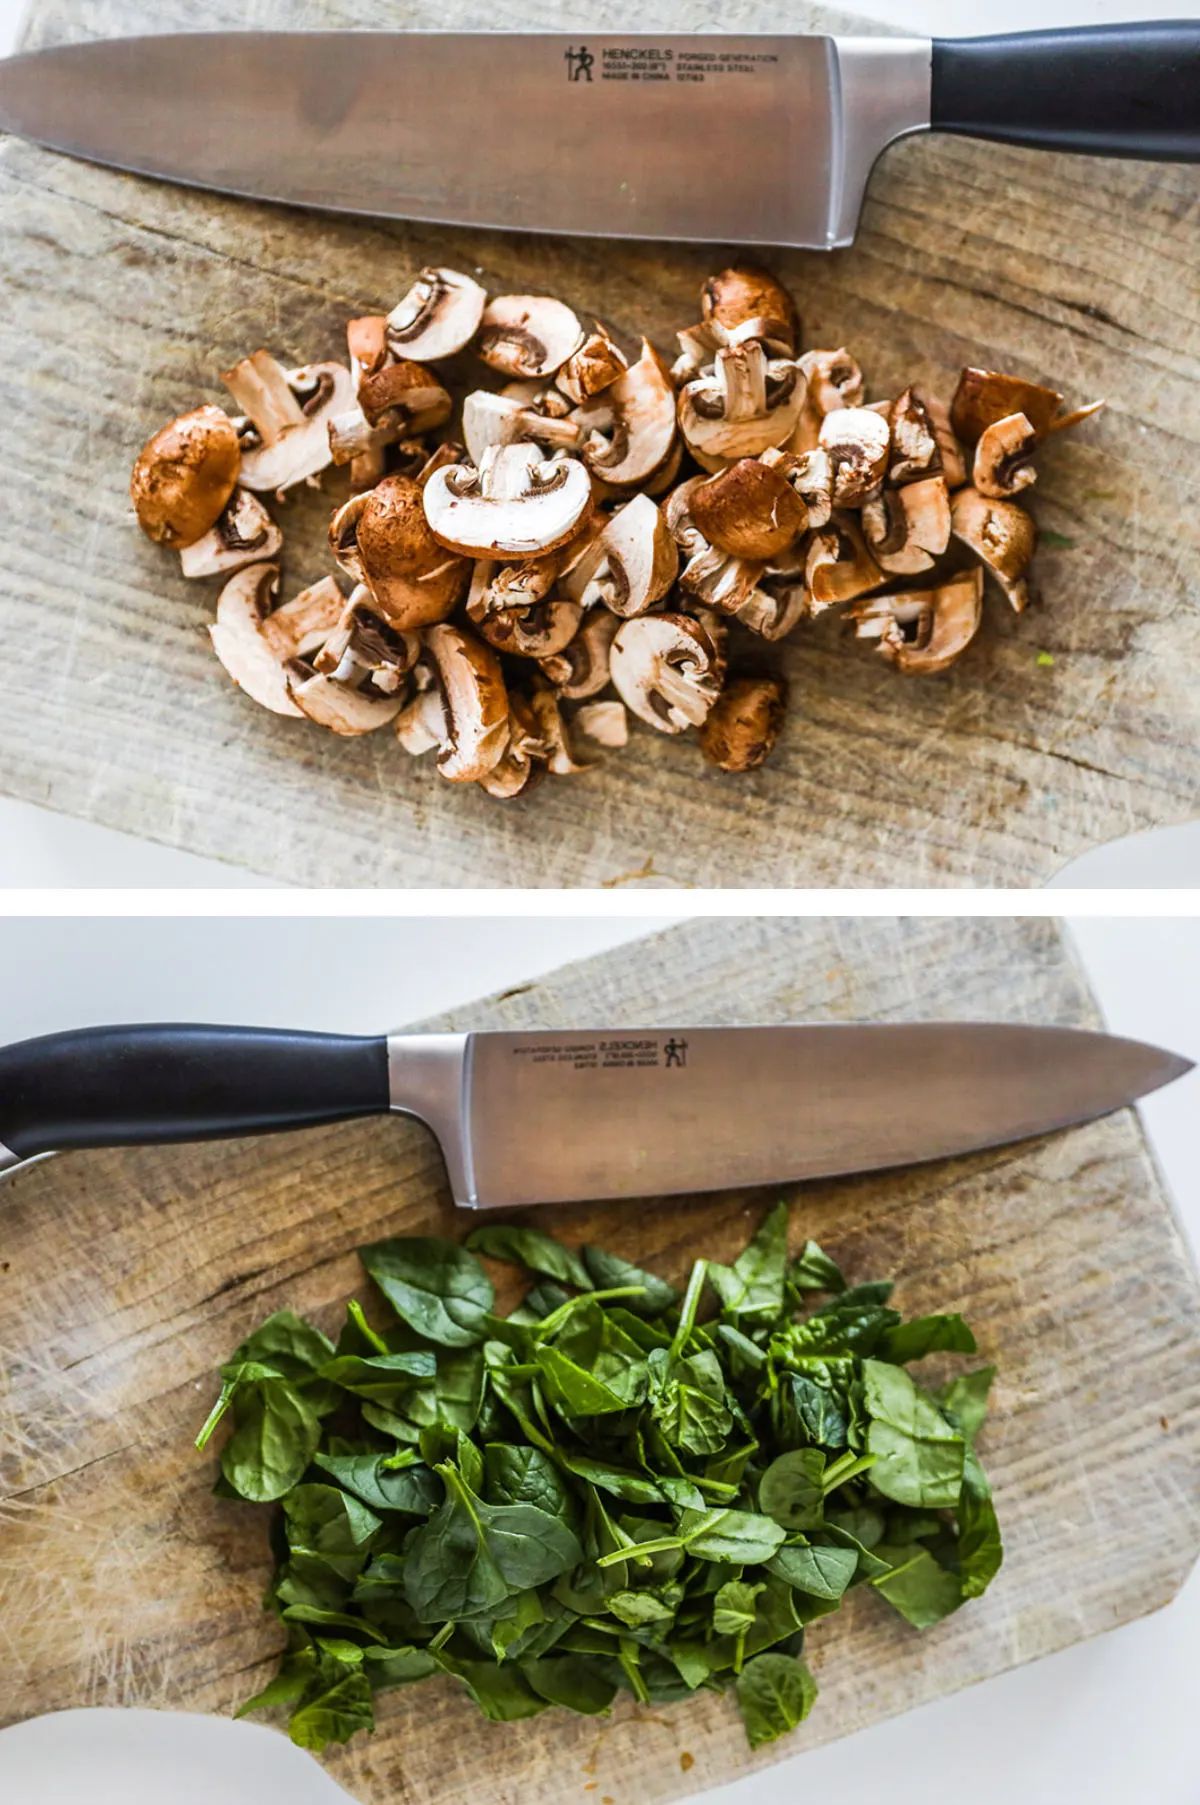 Two overhead images in one: 1. Mushrooms cut into slices on cutting board. 2. Spinach chopped on cutting board. 